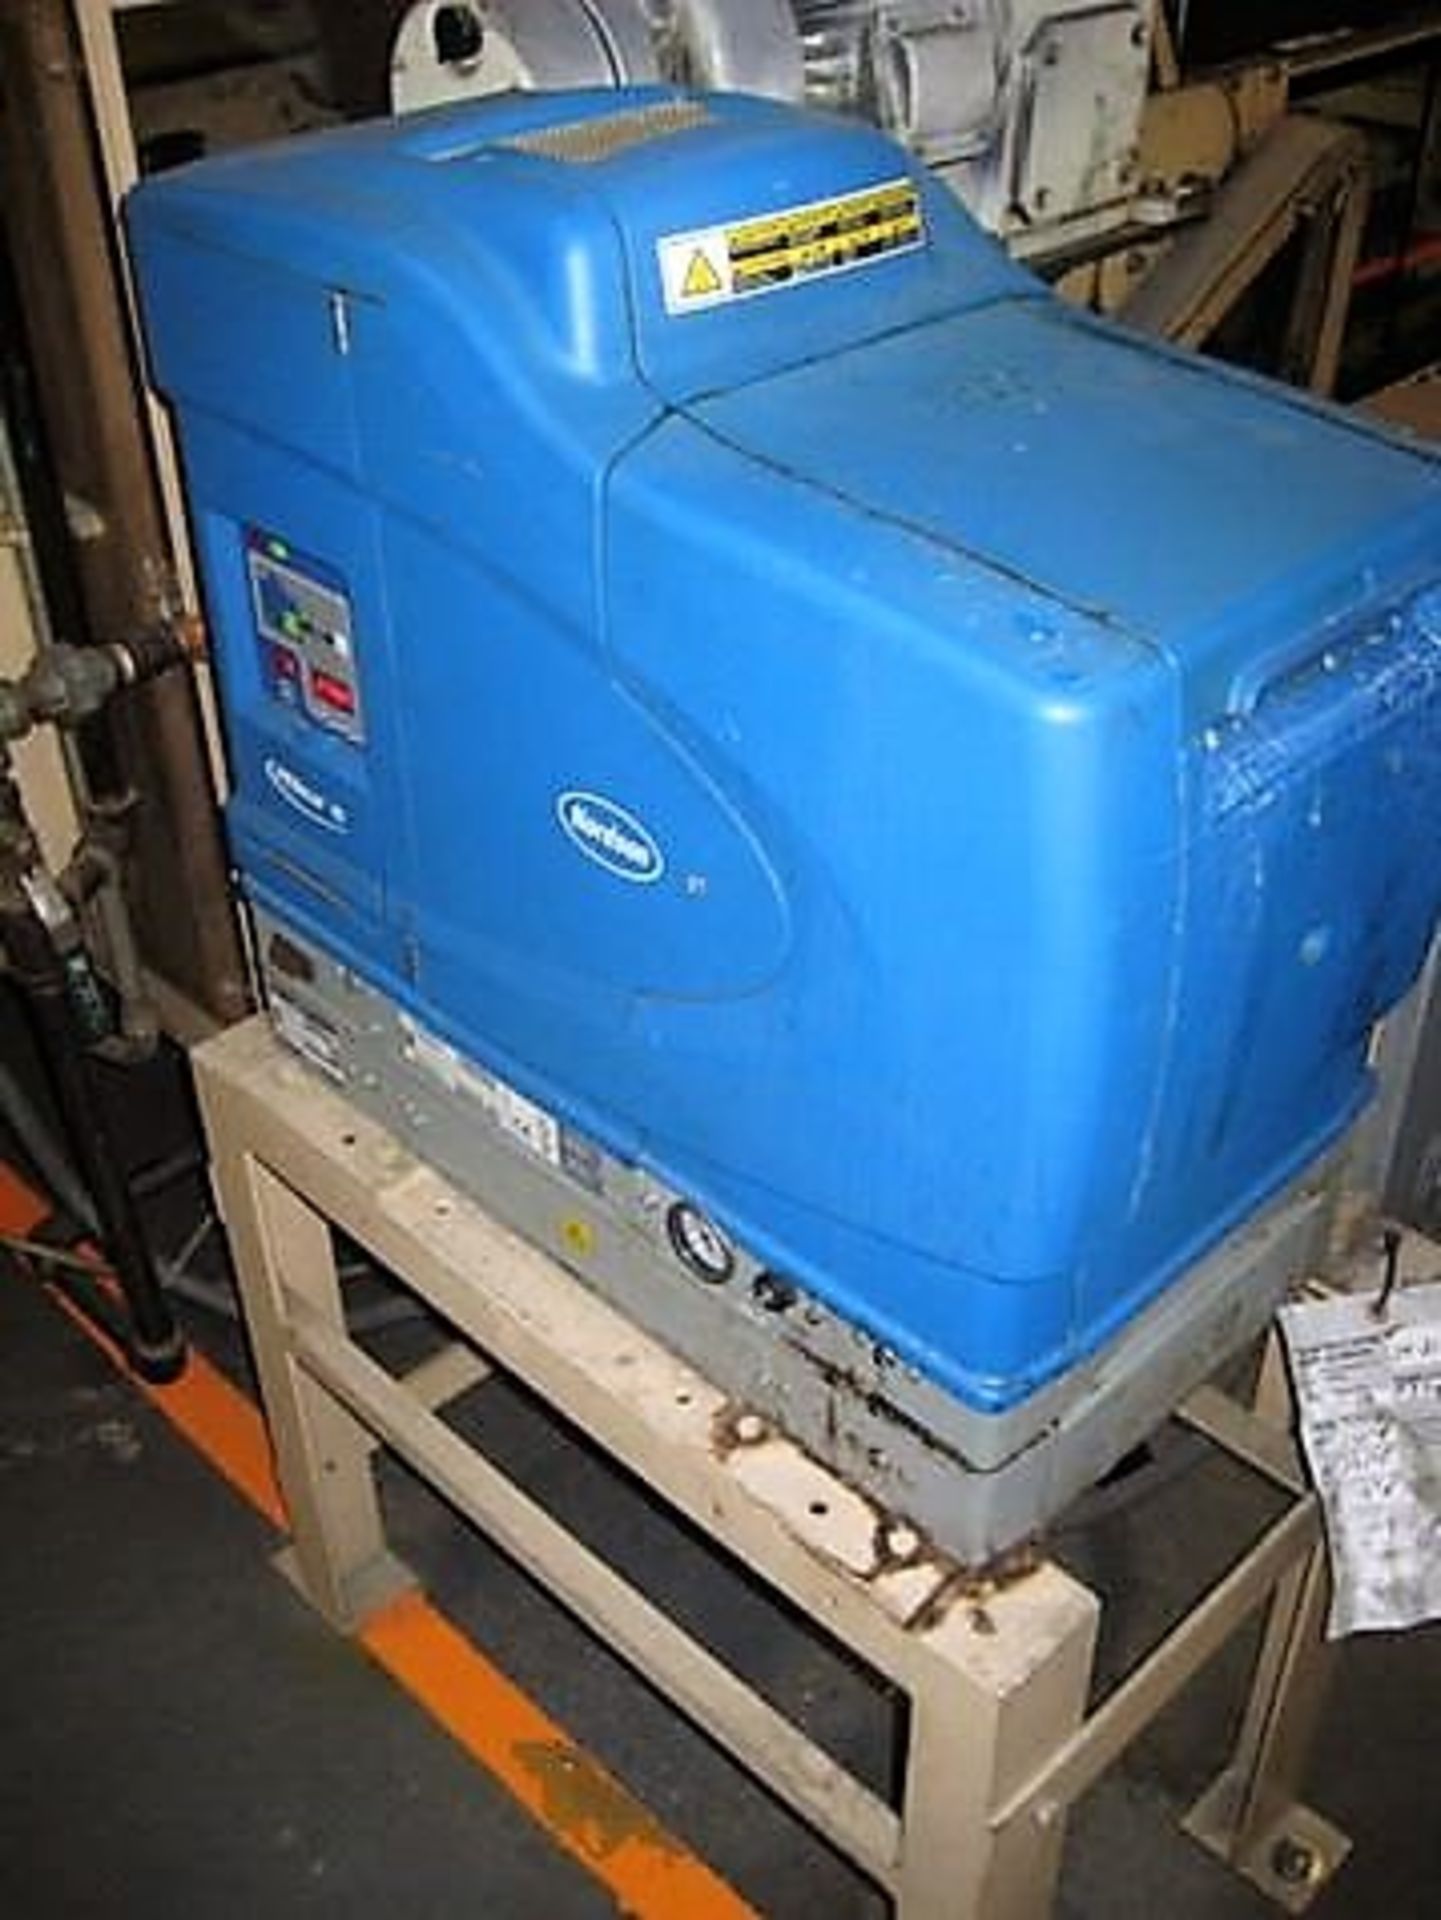 Nigrelli Tray Former, Model # CMTF-100, S/N TF99 -1838-3, very high speed with Nordson ProBlue10 hot - Image 5 of 5